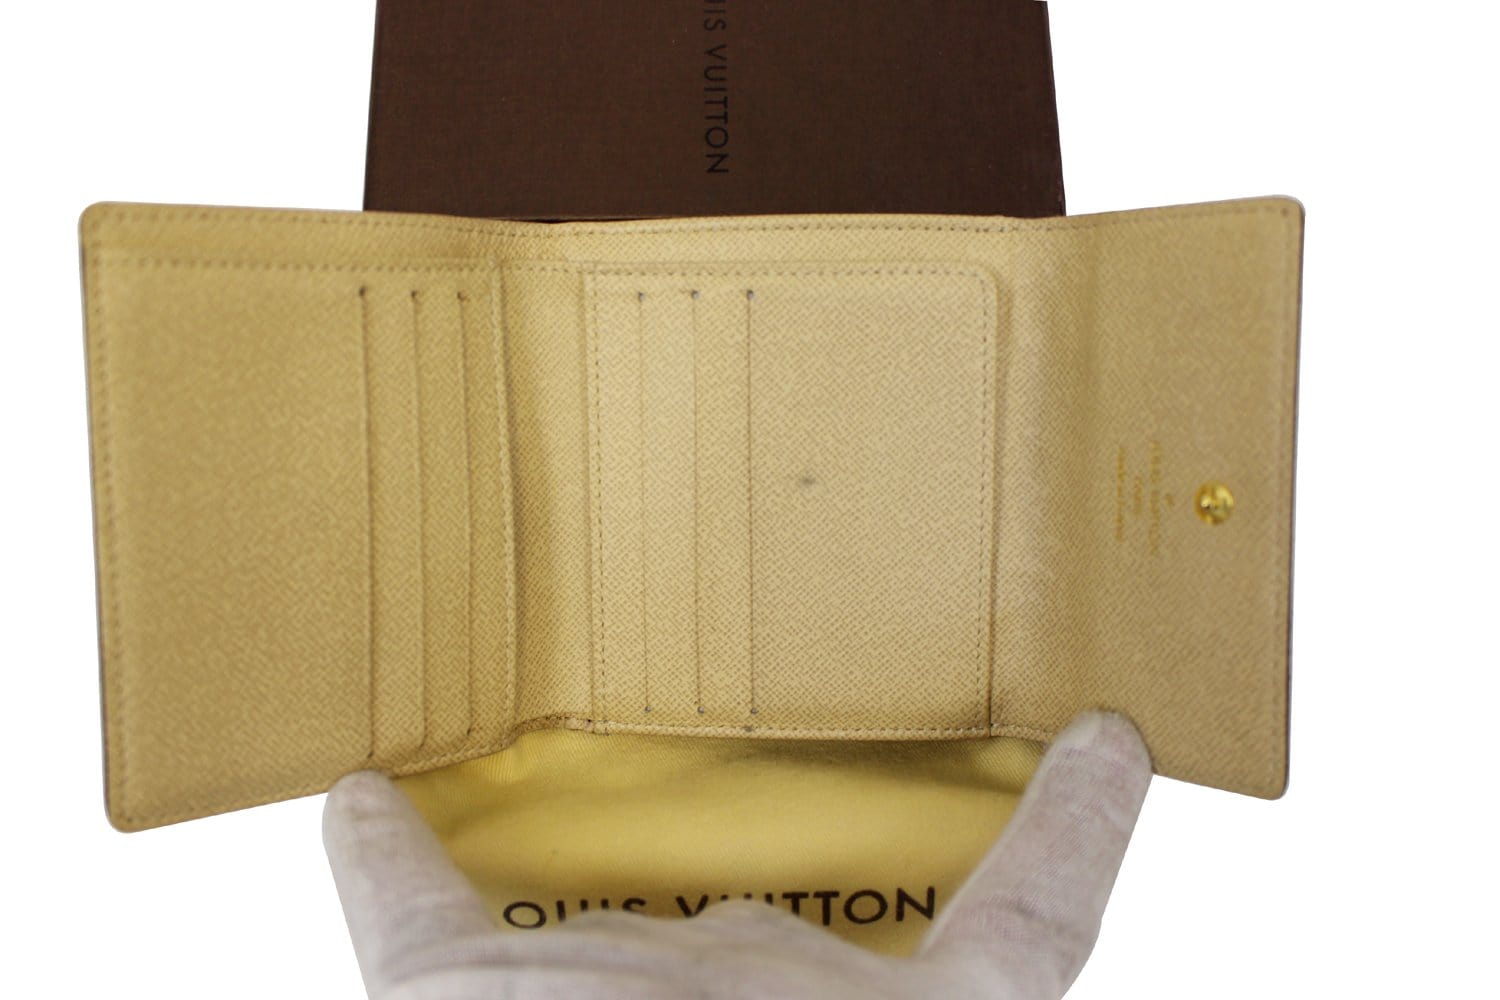 Louis vuitton wallet With paper bag - SOLID GOLD Jewelry